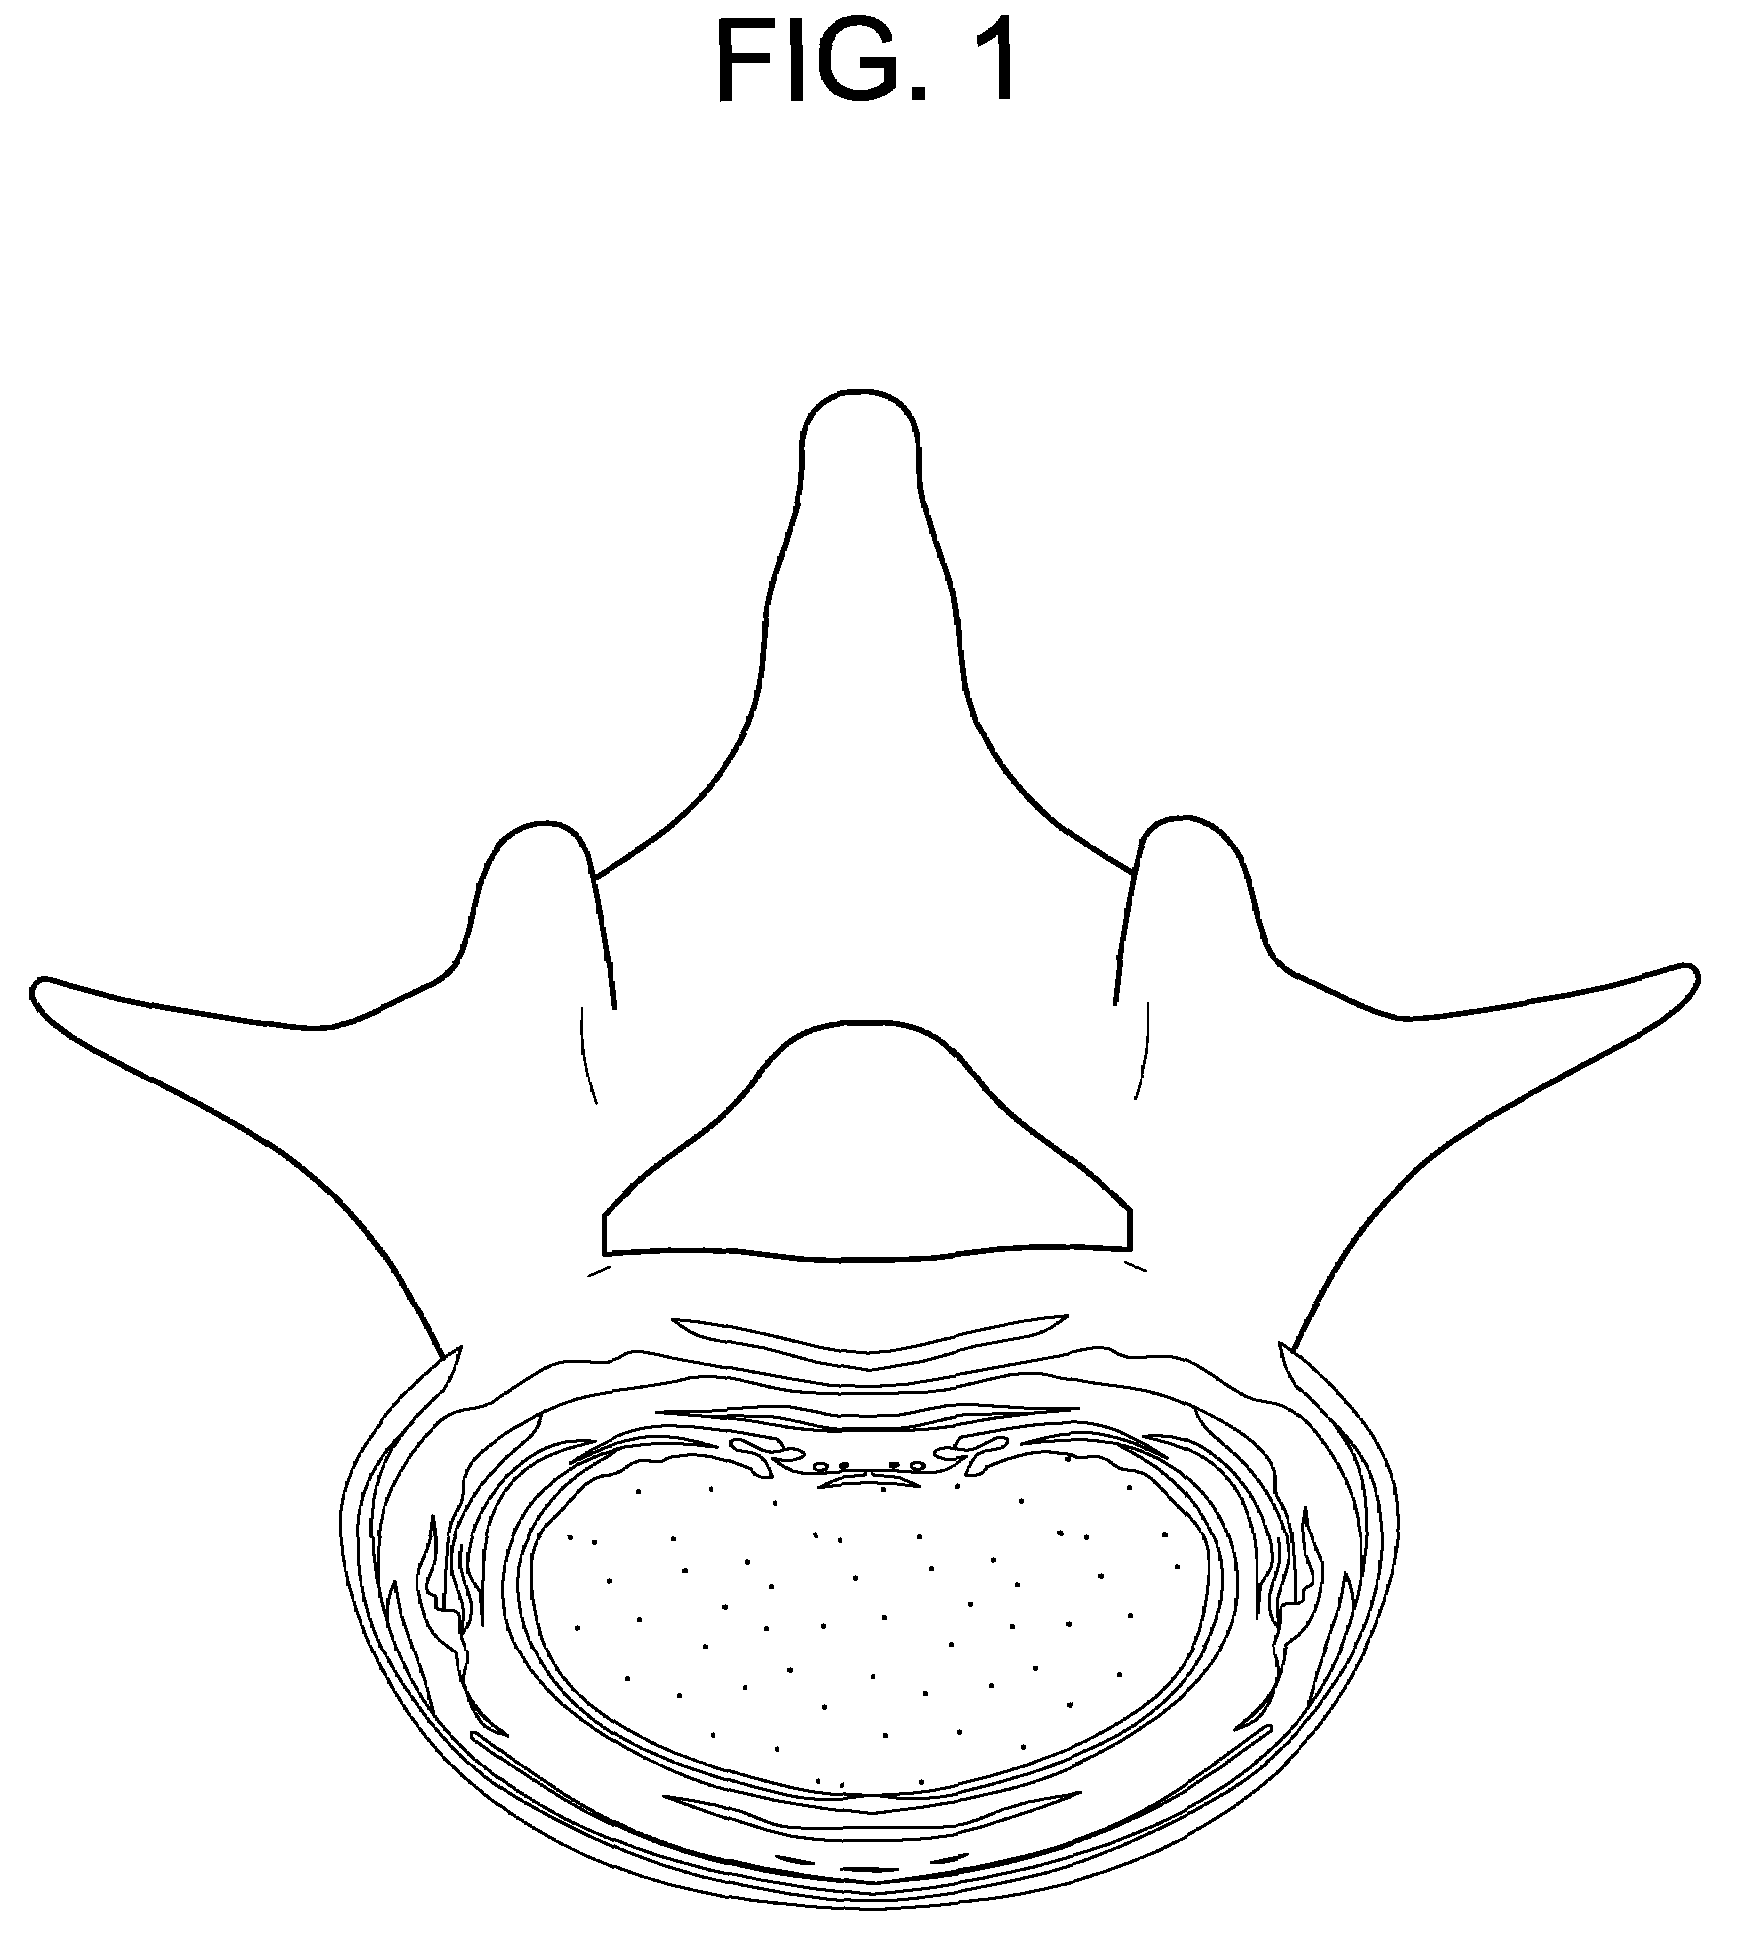 Nucleus replacement device and method